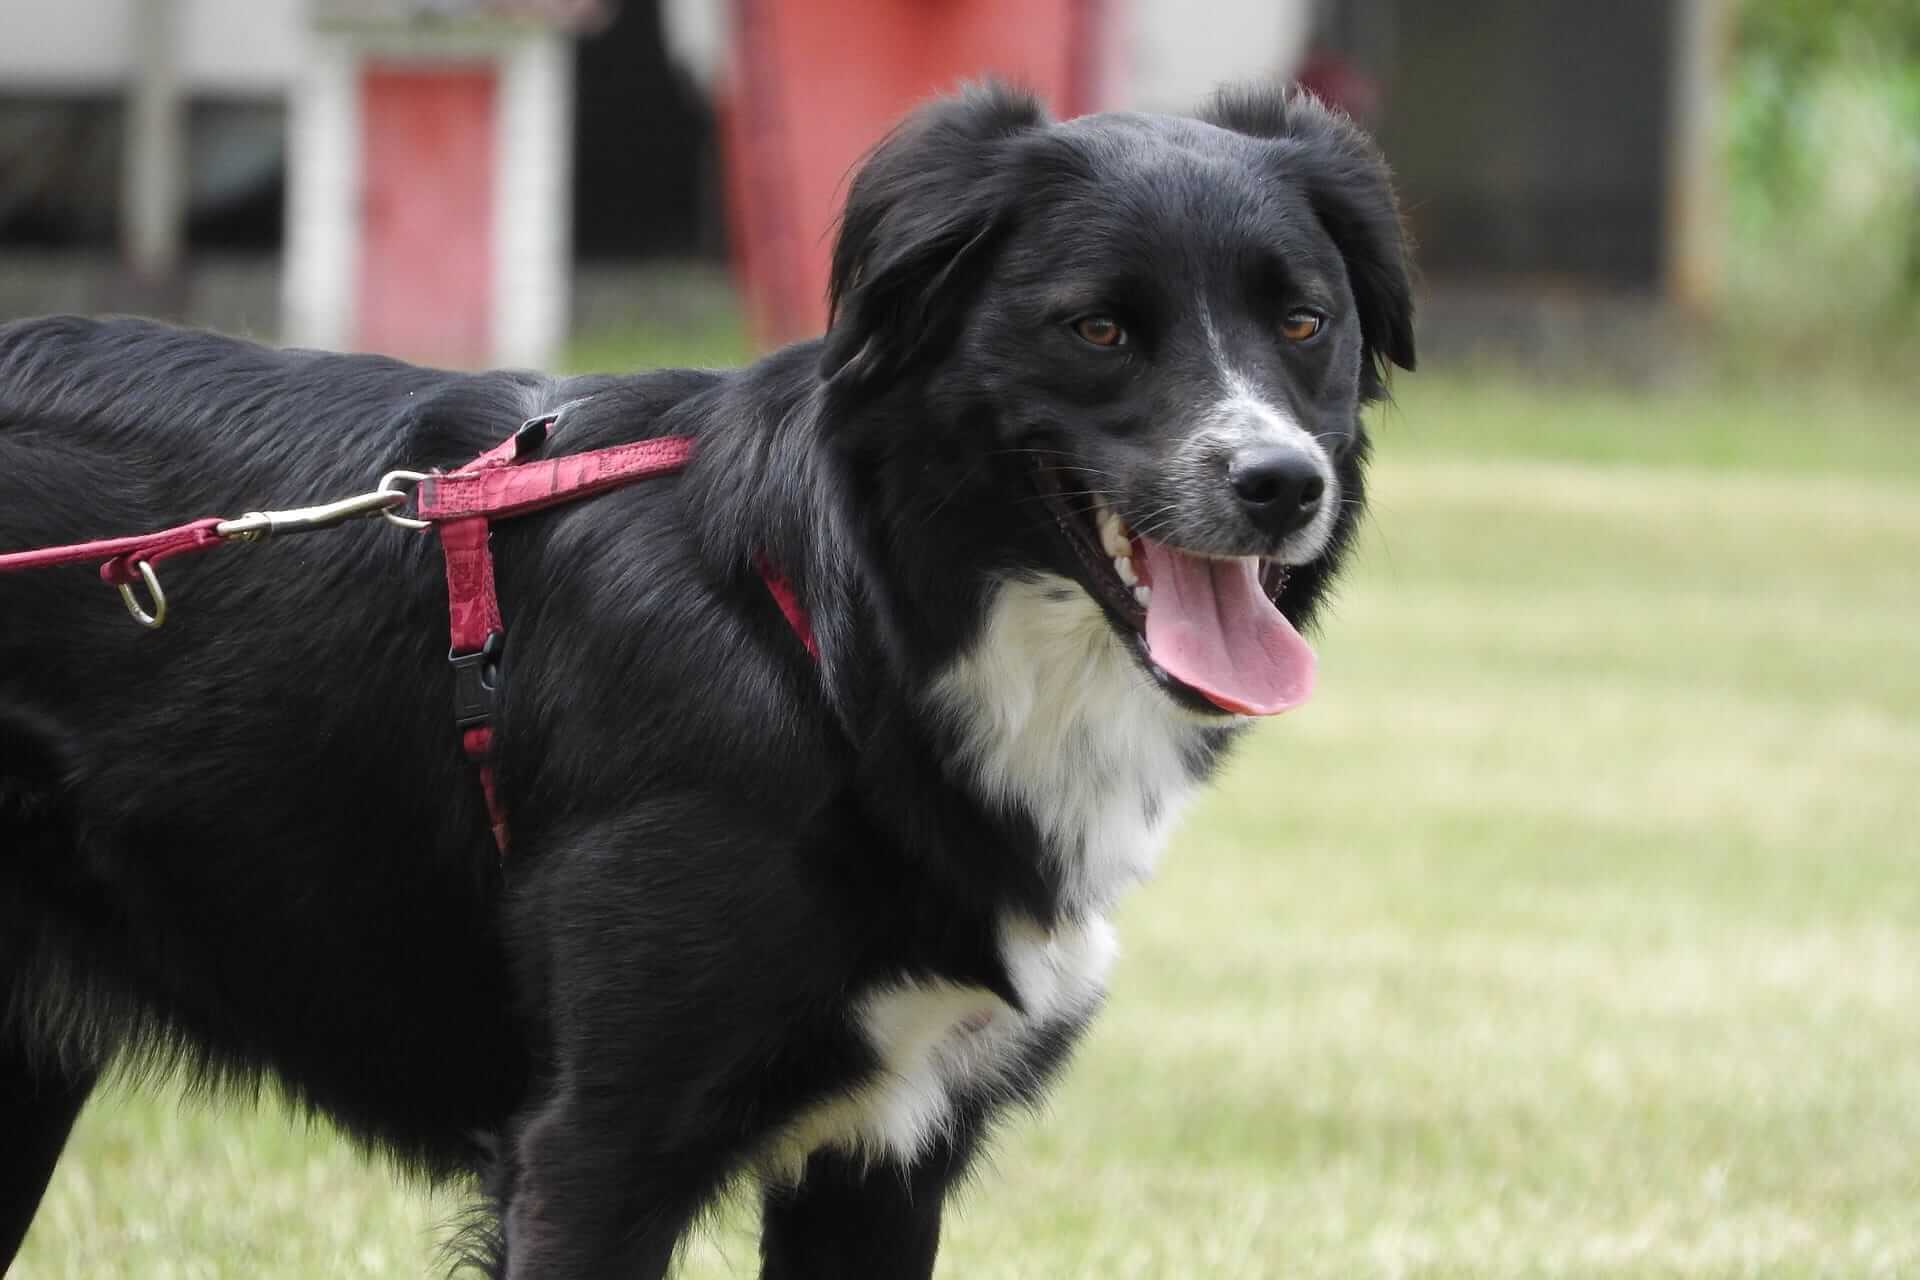 A dog wearing a harness and leash outdoors